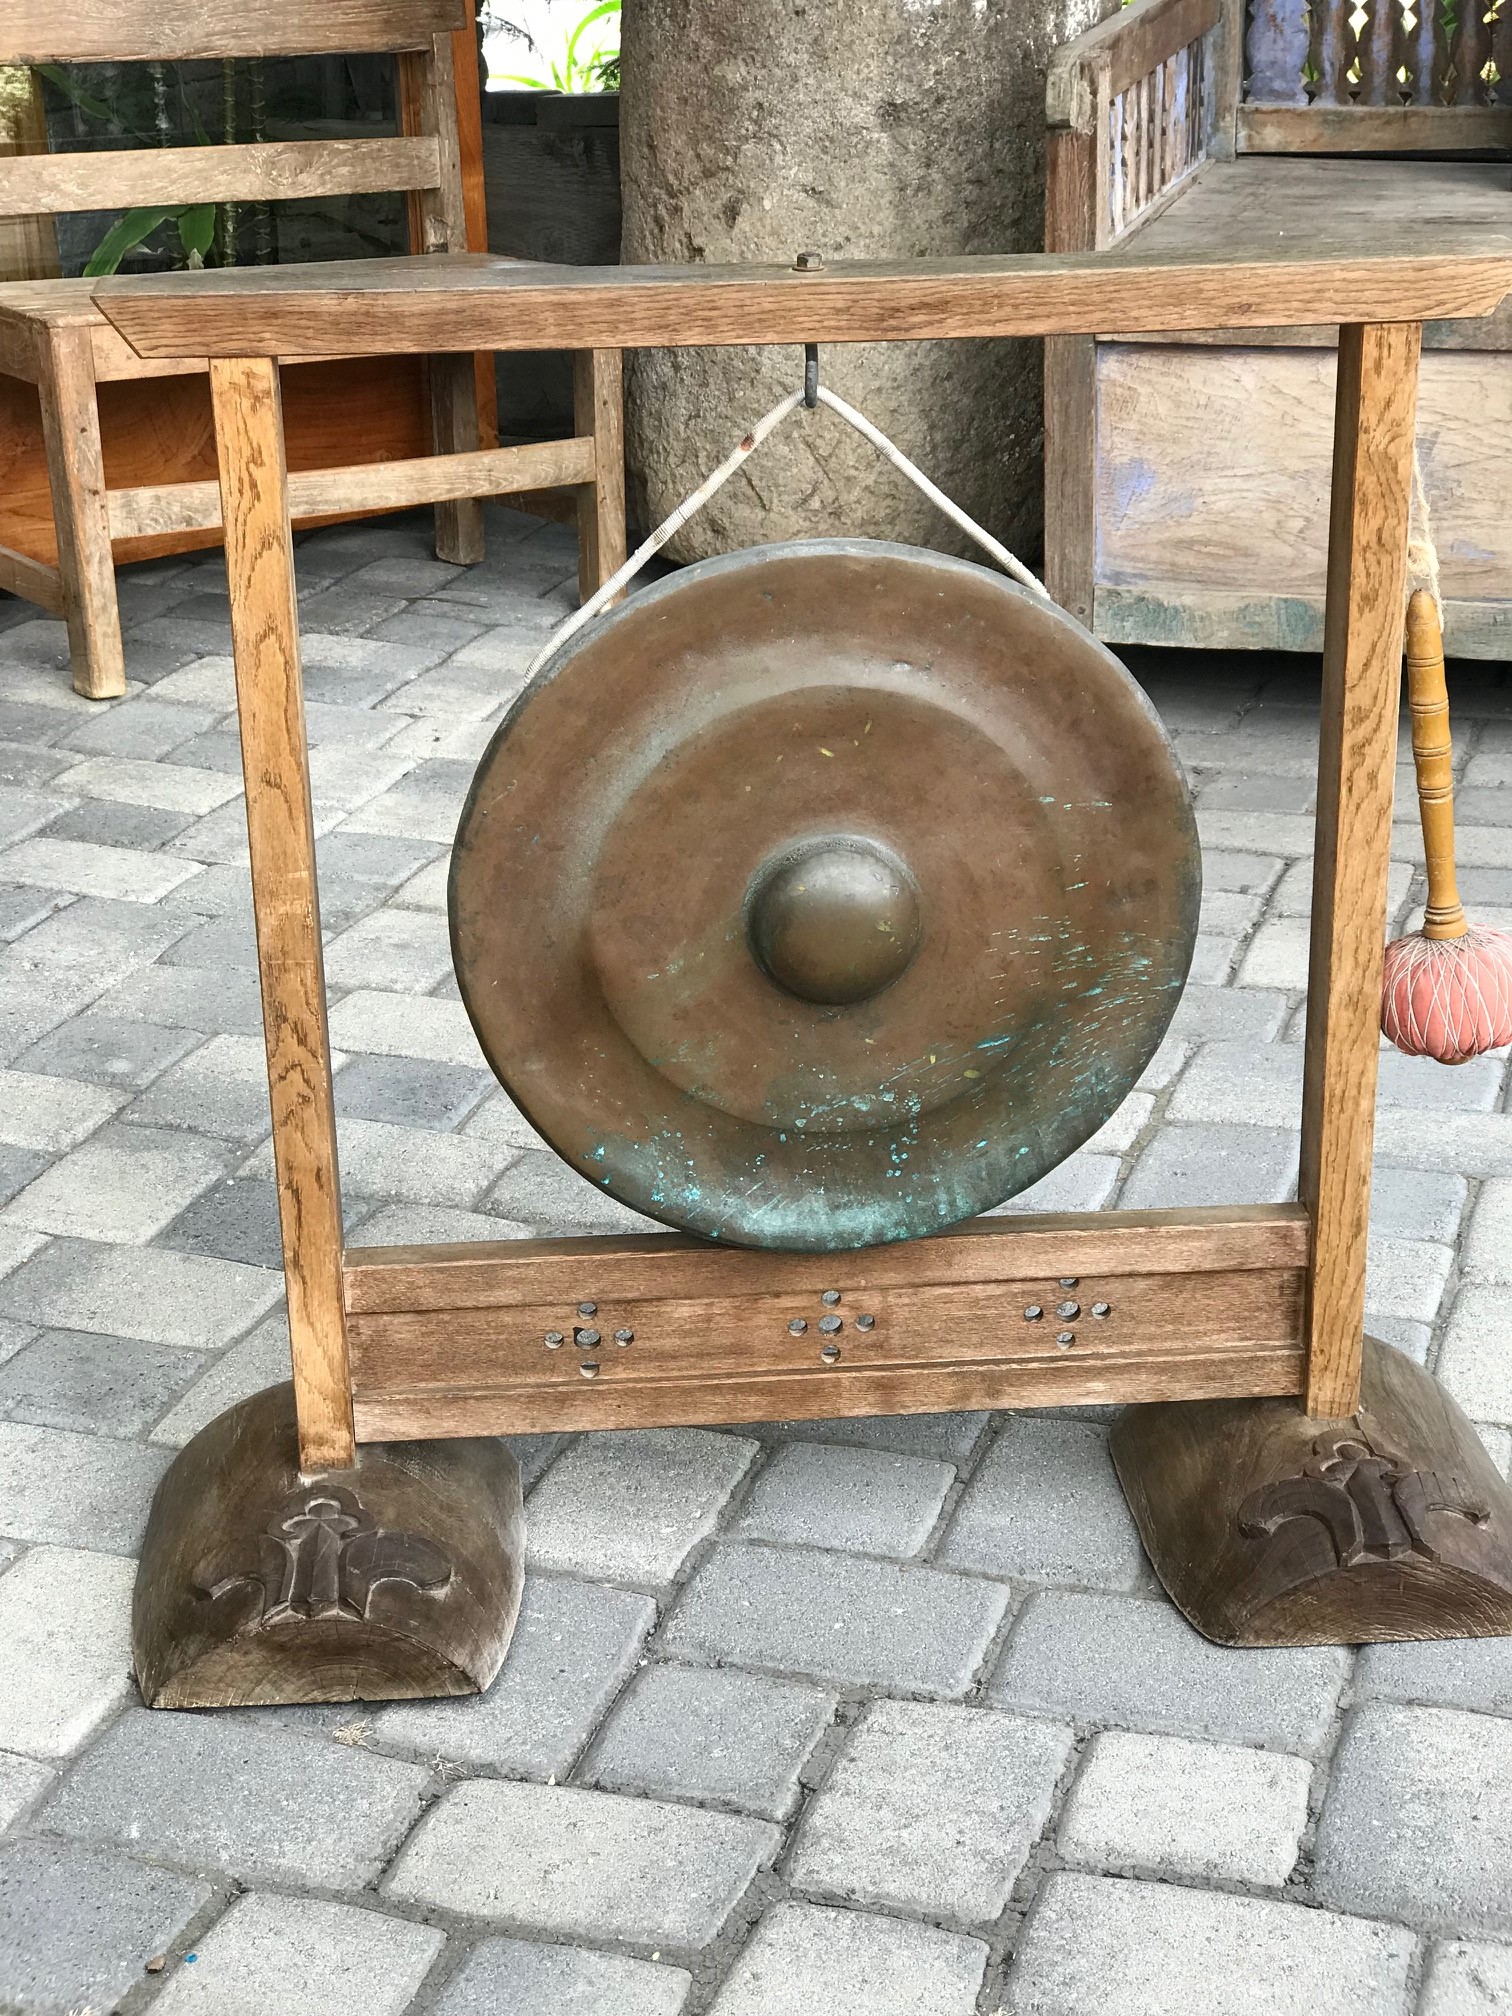 Musical Instrument, Hanging Gong and Striker with wood frame and hand carved stand, Japan, bronze, wood, fabric, rope, gong - 32 1/2" x 36" x 12" (Frame - 17 1/2" x 6"), $2400., thedavidalancollection , solana beach, ca